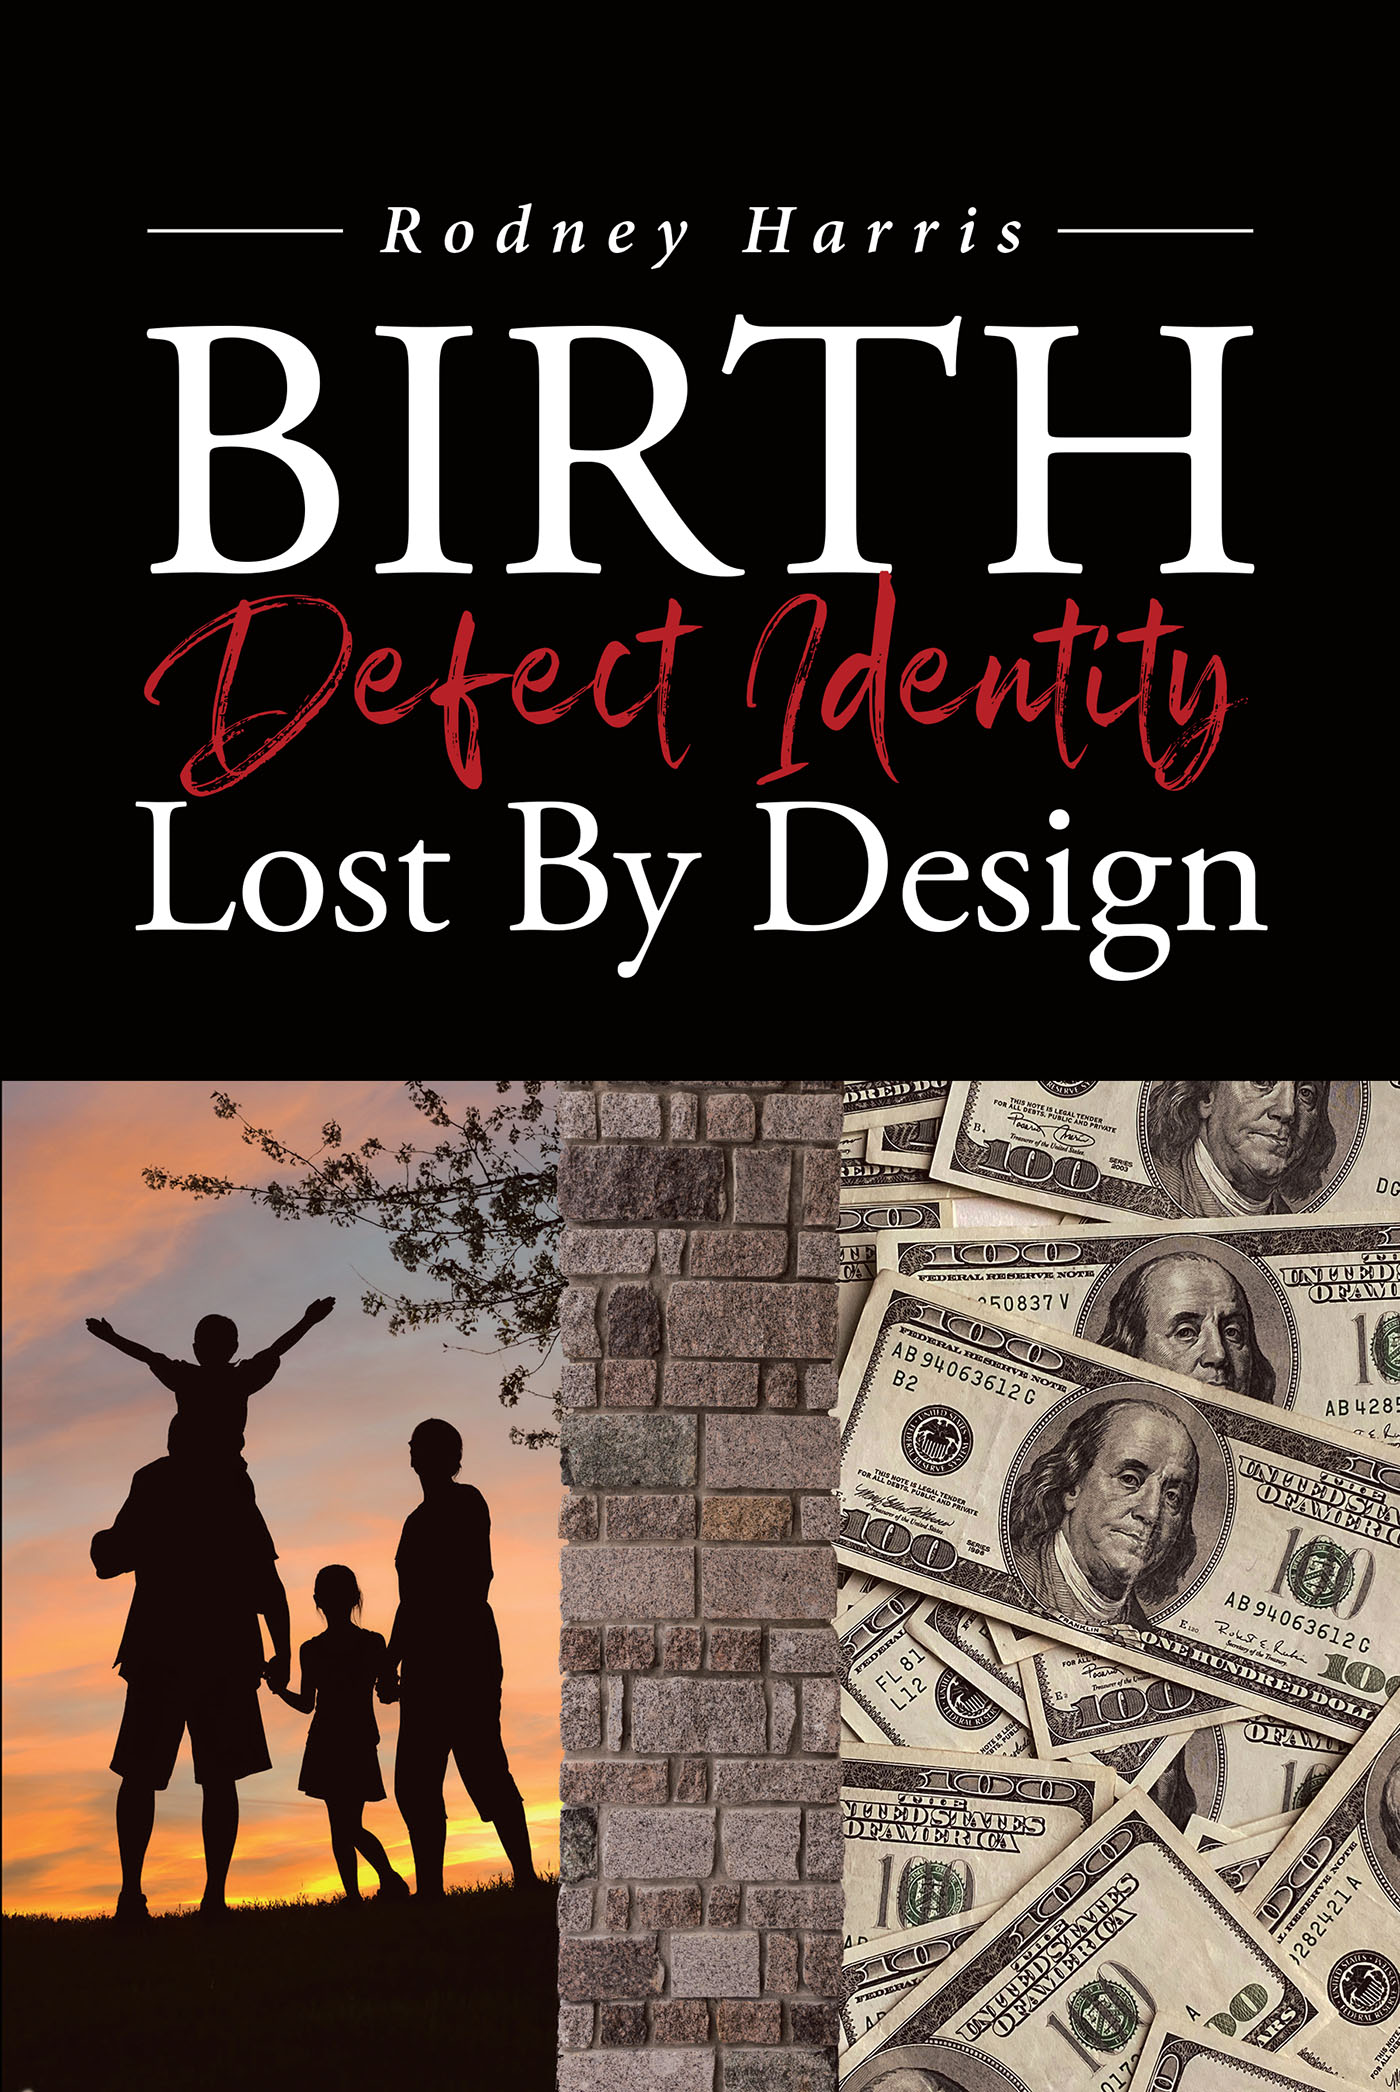 Author Rodney Harris’s New Book, "Birth Defect Identity Lost by Design," is About the Deliberate Destruction of the Black Family and Some of the Ways It Was Done